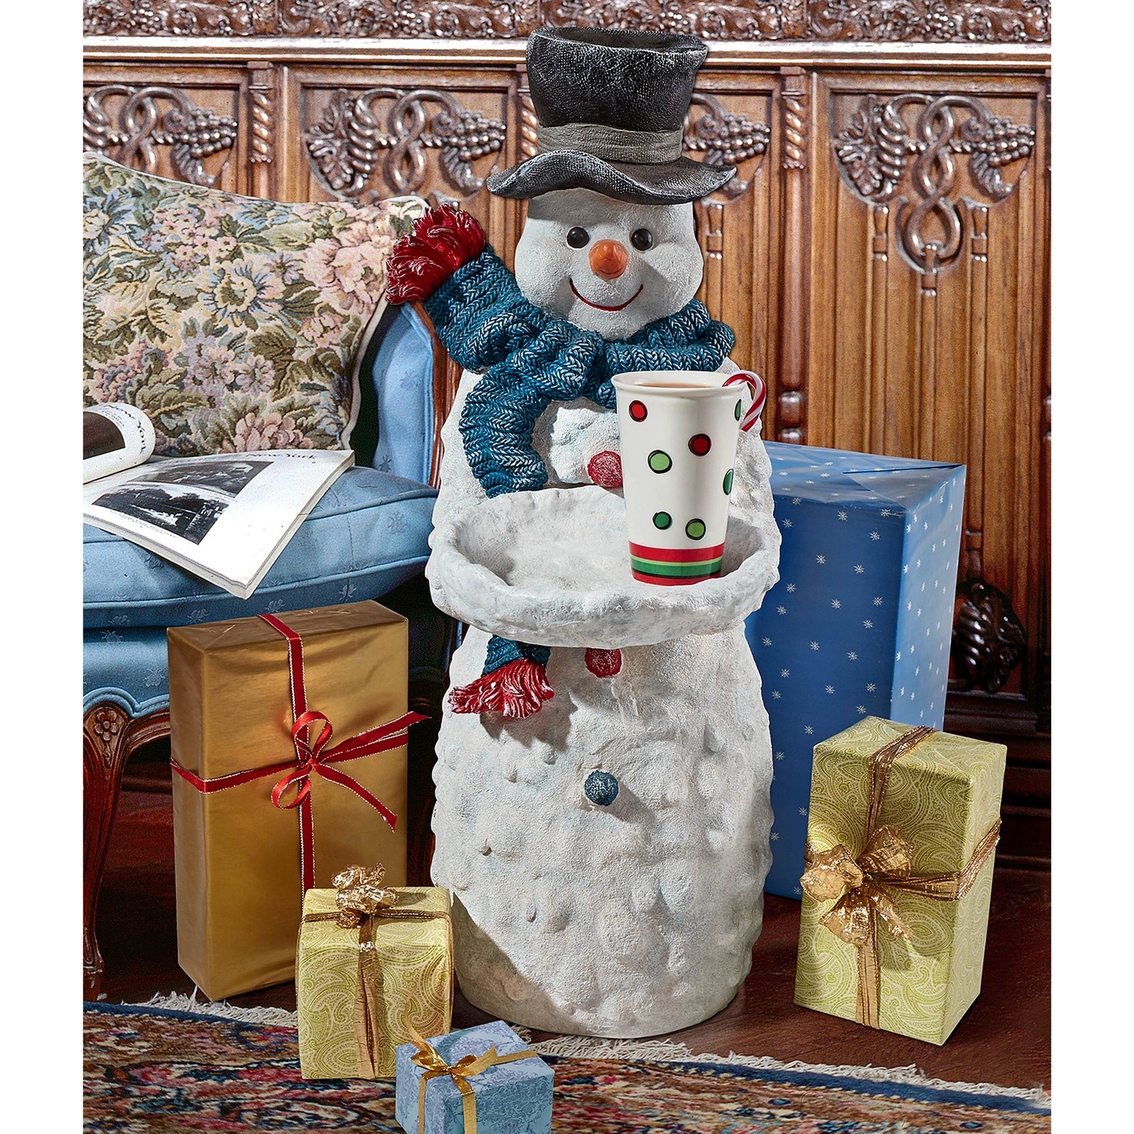 Design Toscano Flurry the Snowman Butler Table - Image 4 of 4